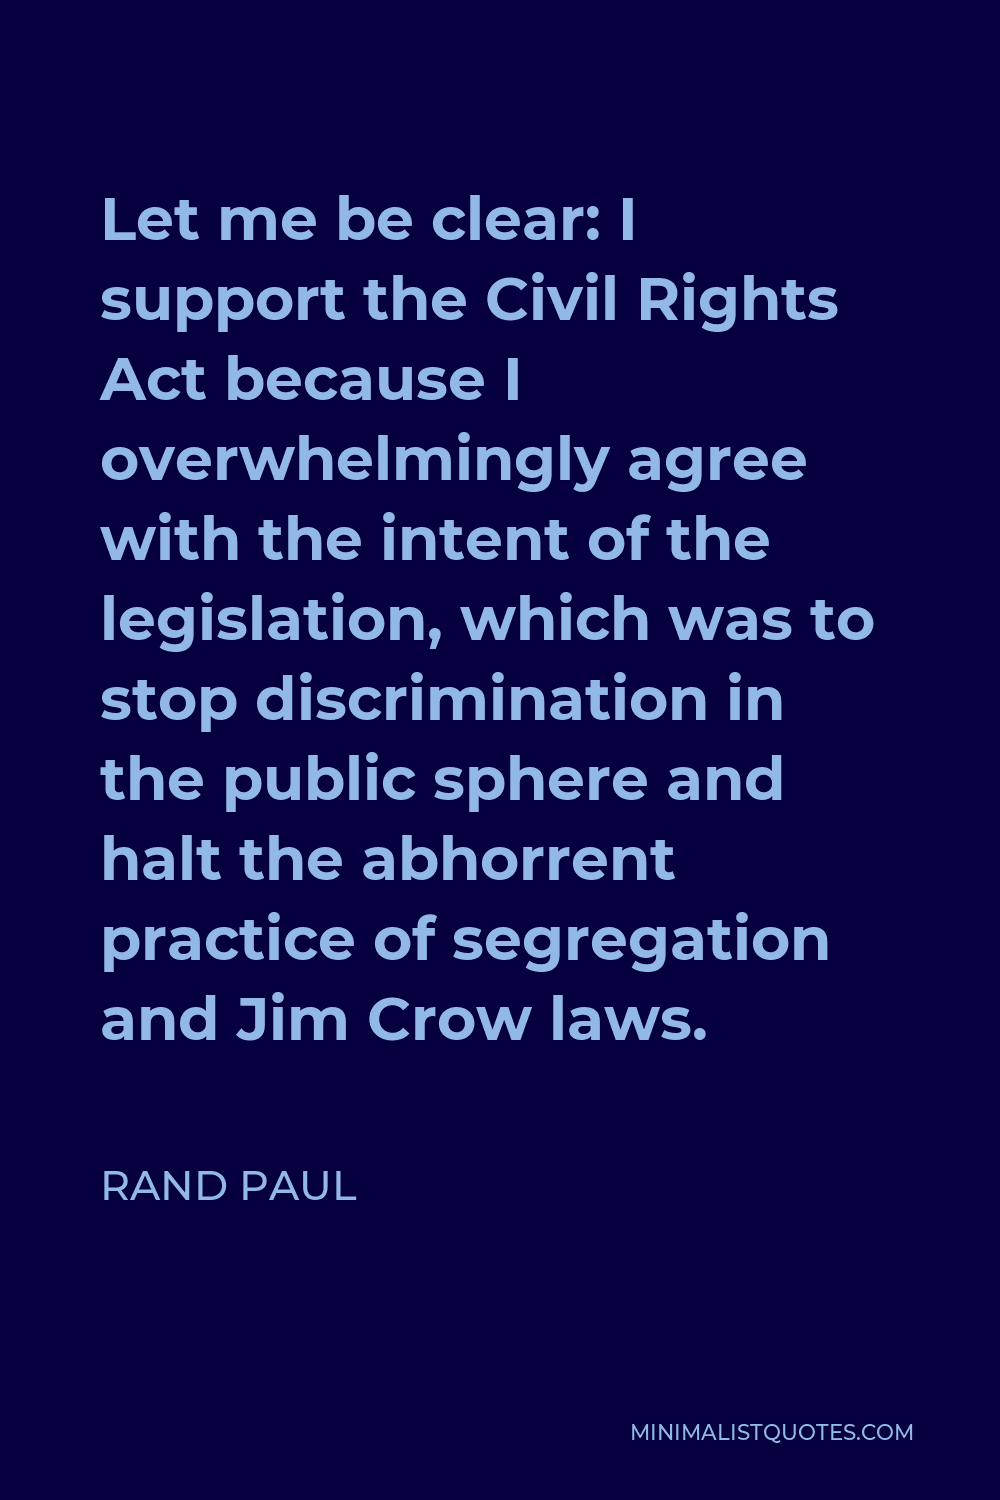 Rand Paul Quote - Let me be clear: I support the Civil Rights Act because I overwhelmingly agree with the intent of the legislation, which was to stop discrimination in the public sphere and halt the abhorrent practice of segregation and Jim Crow laws.